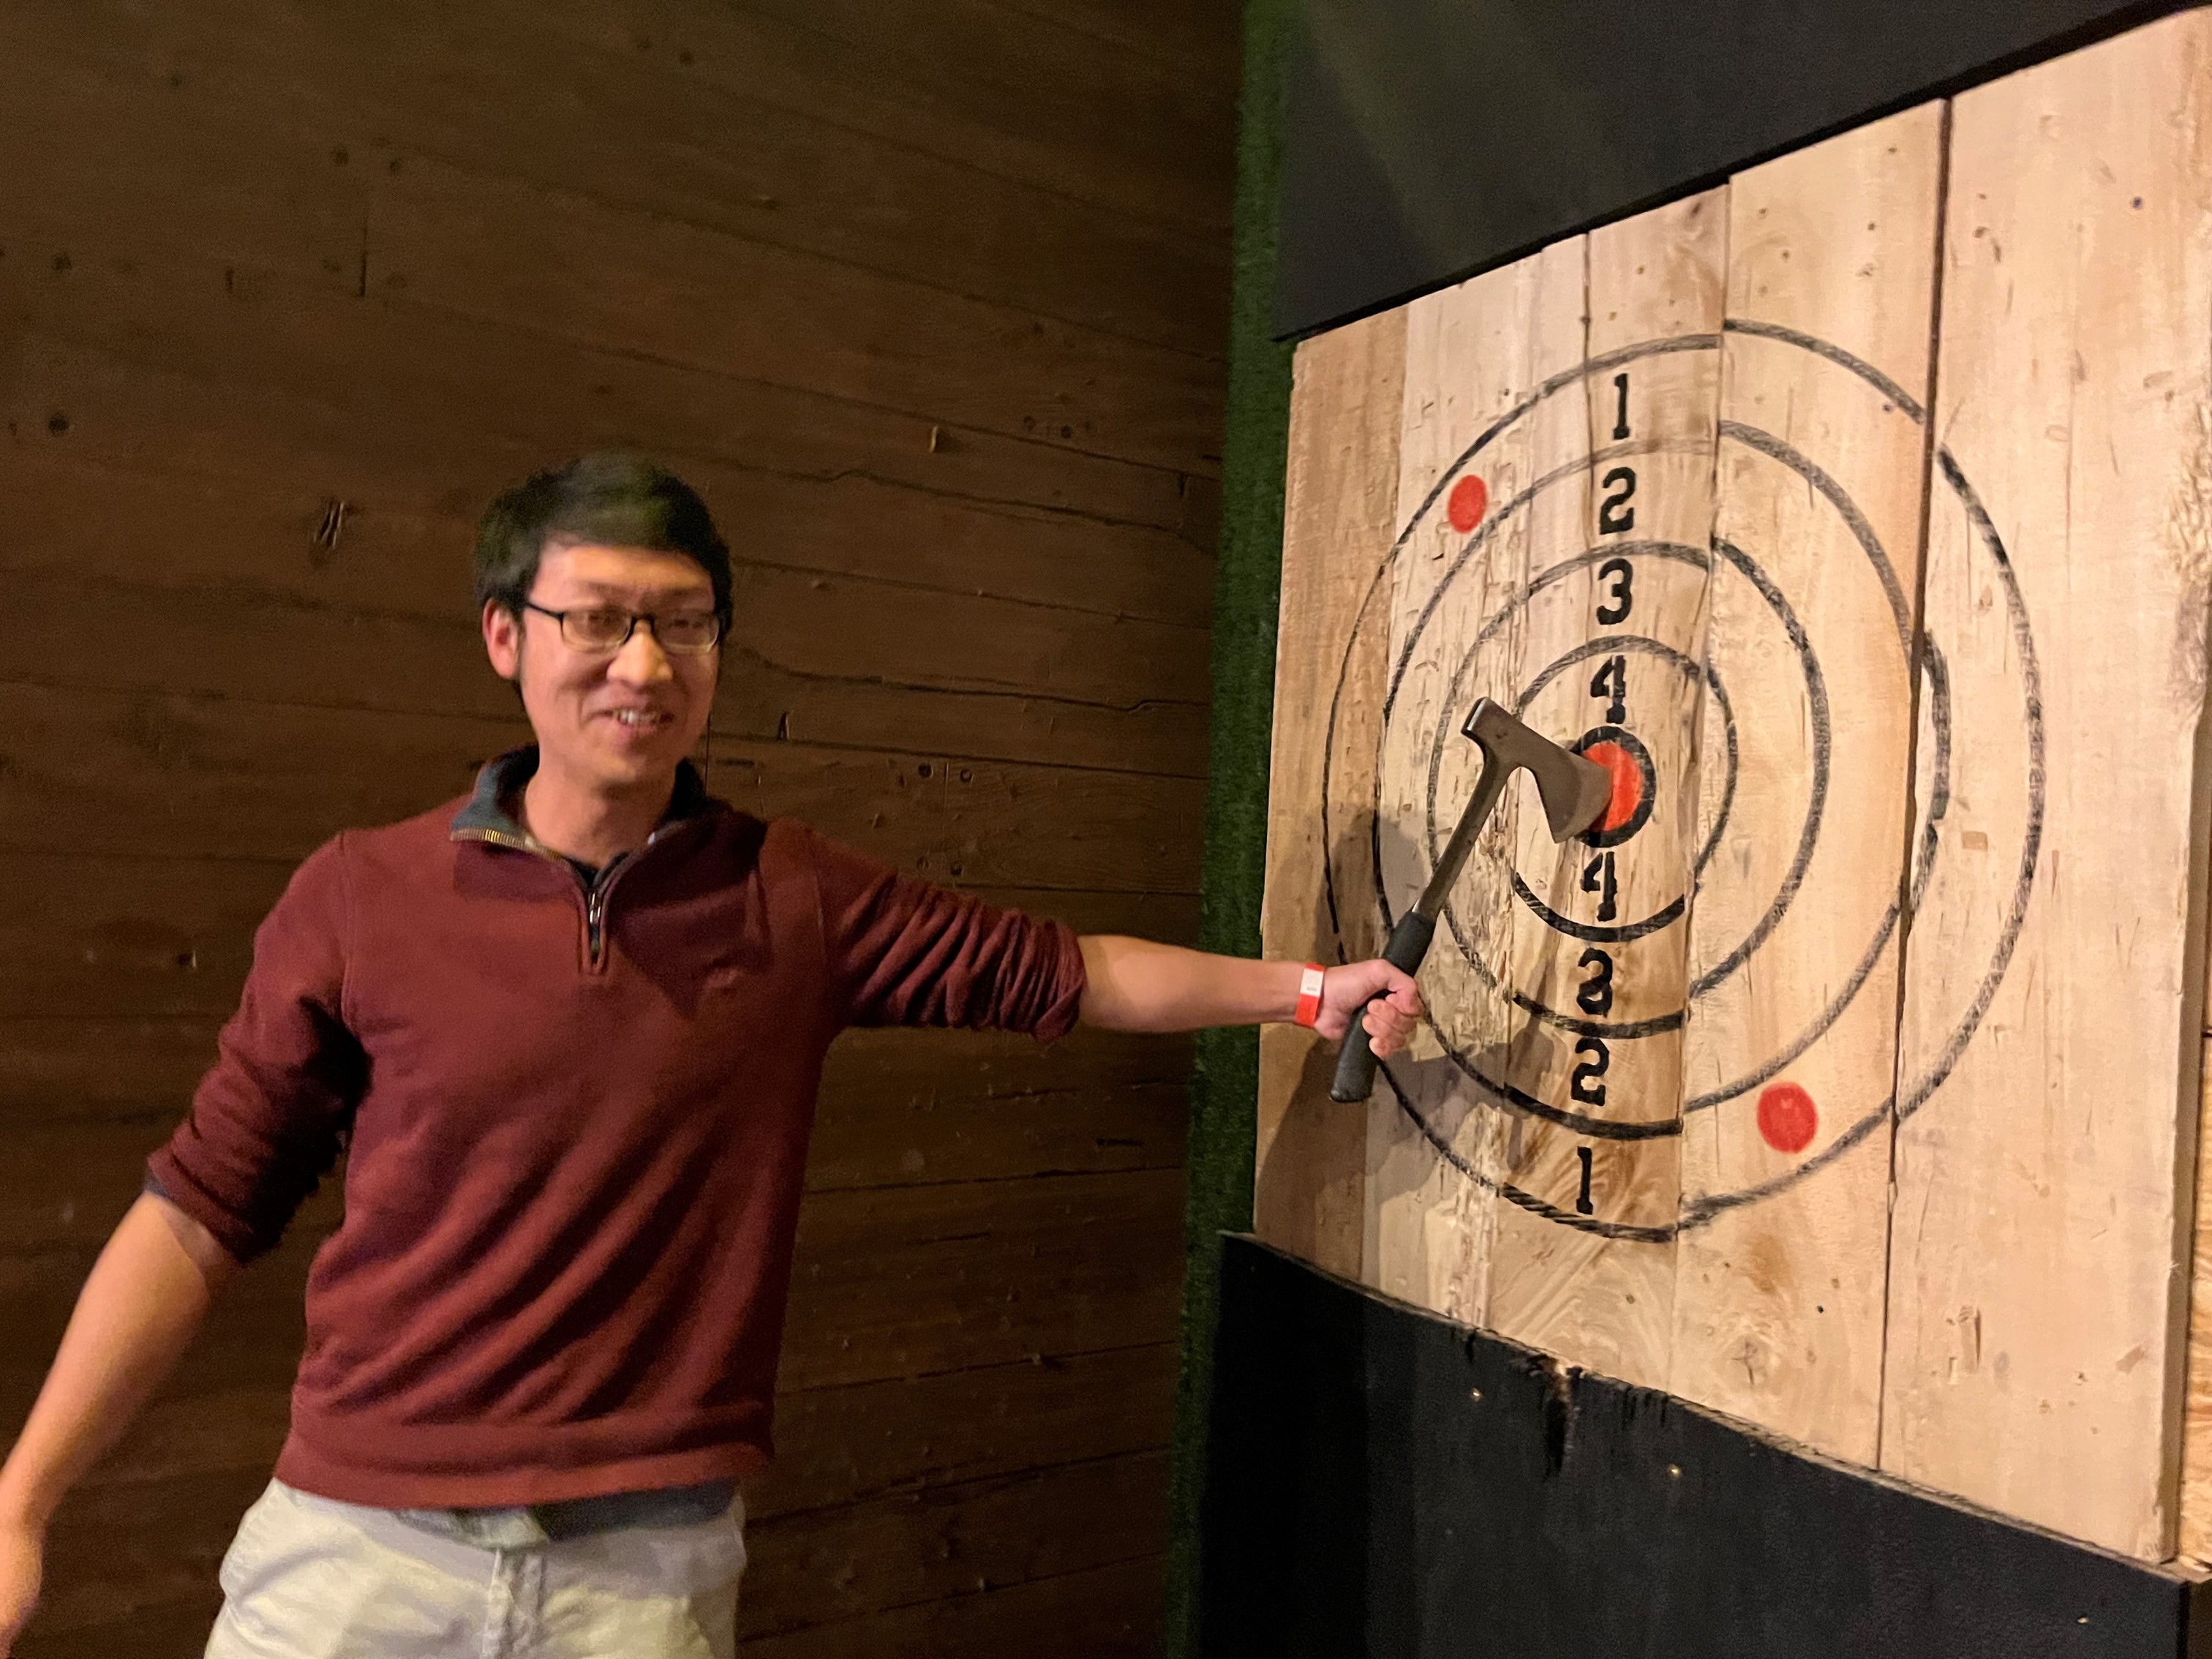 Lab member shows his axe in the bullseye of target